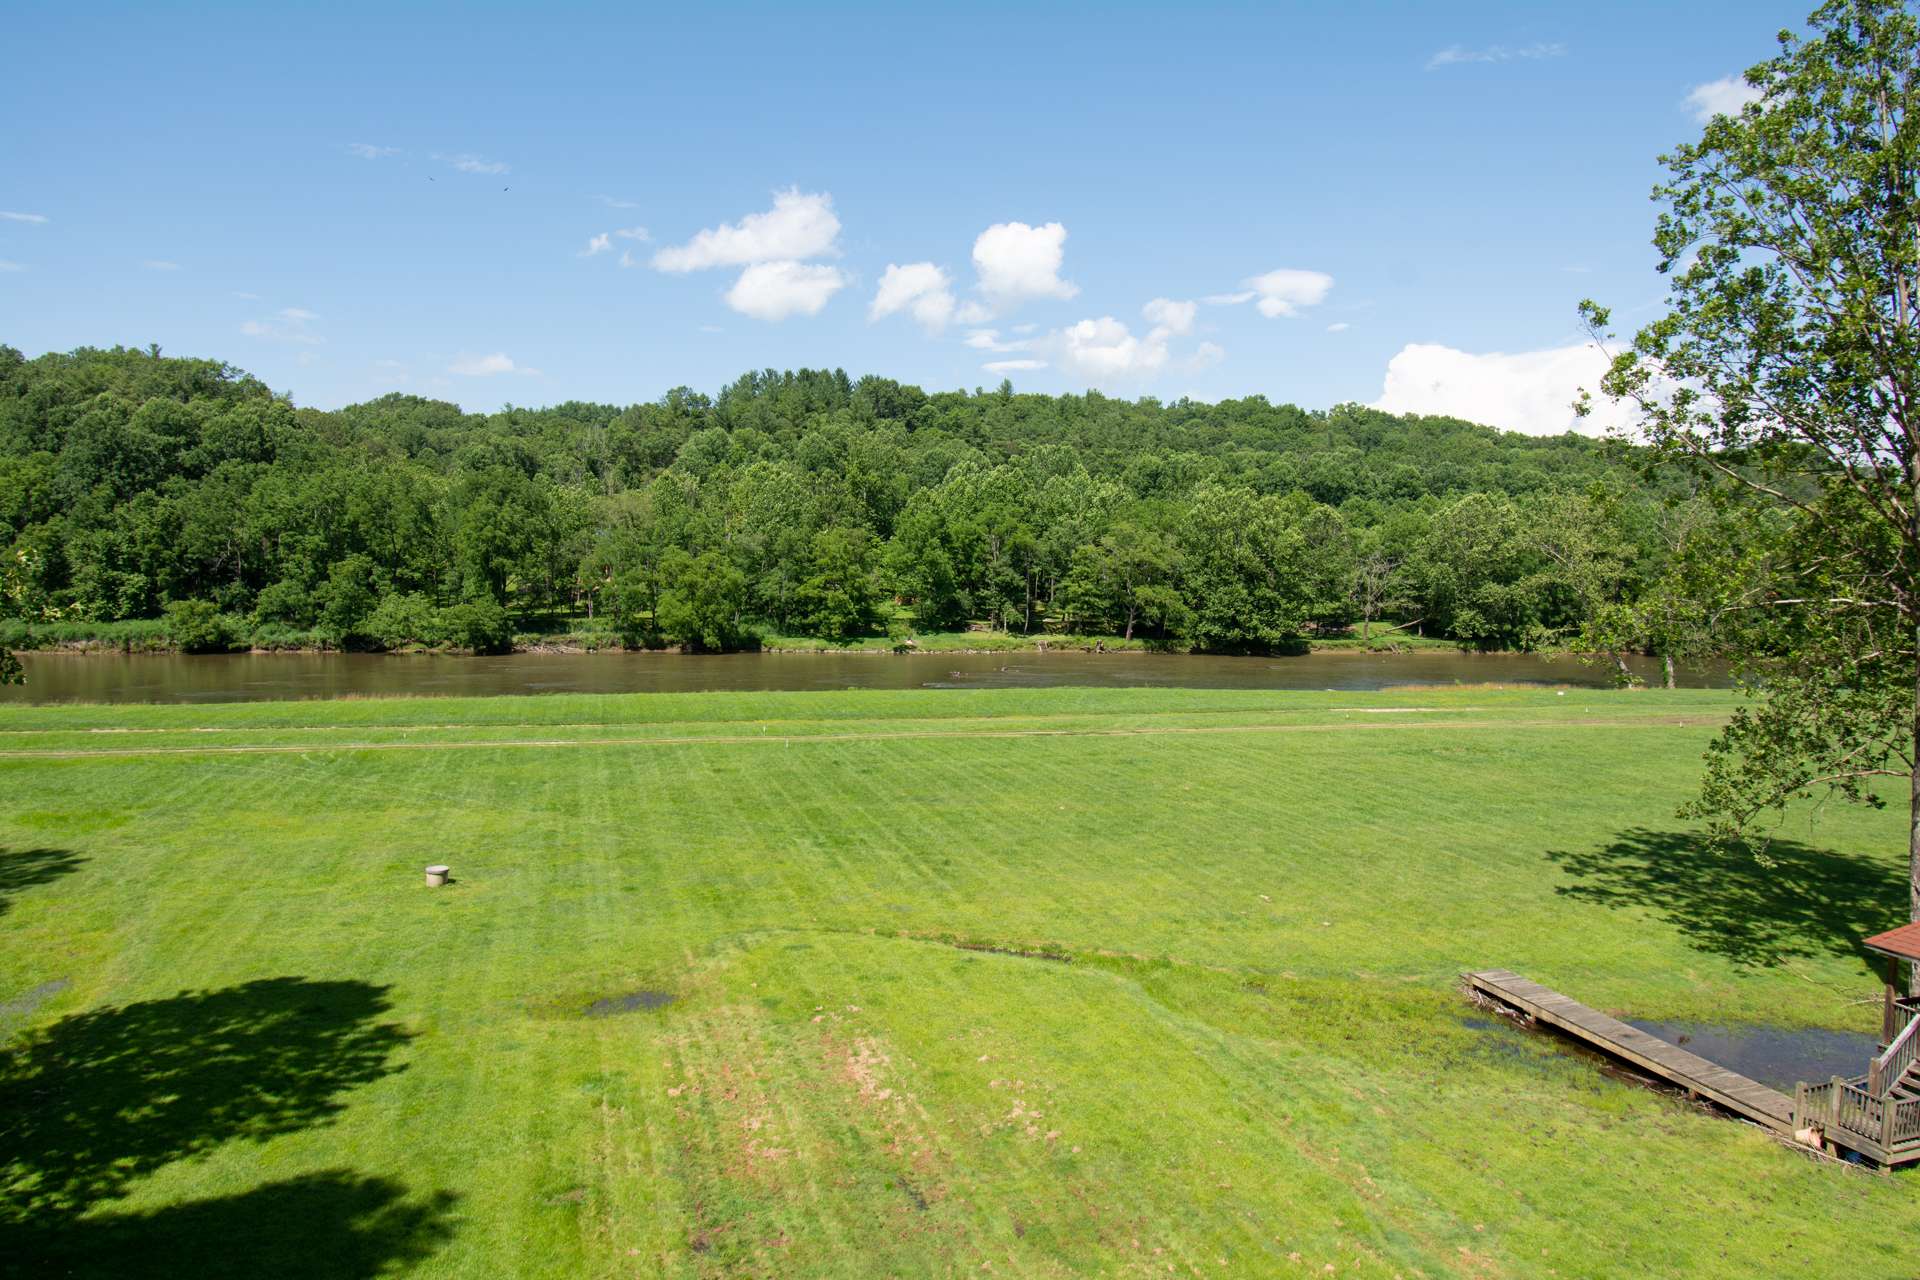 The river frontage offers an open mostly level lawn area for outdoor play and easy access to the river.